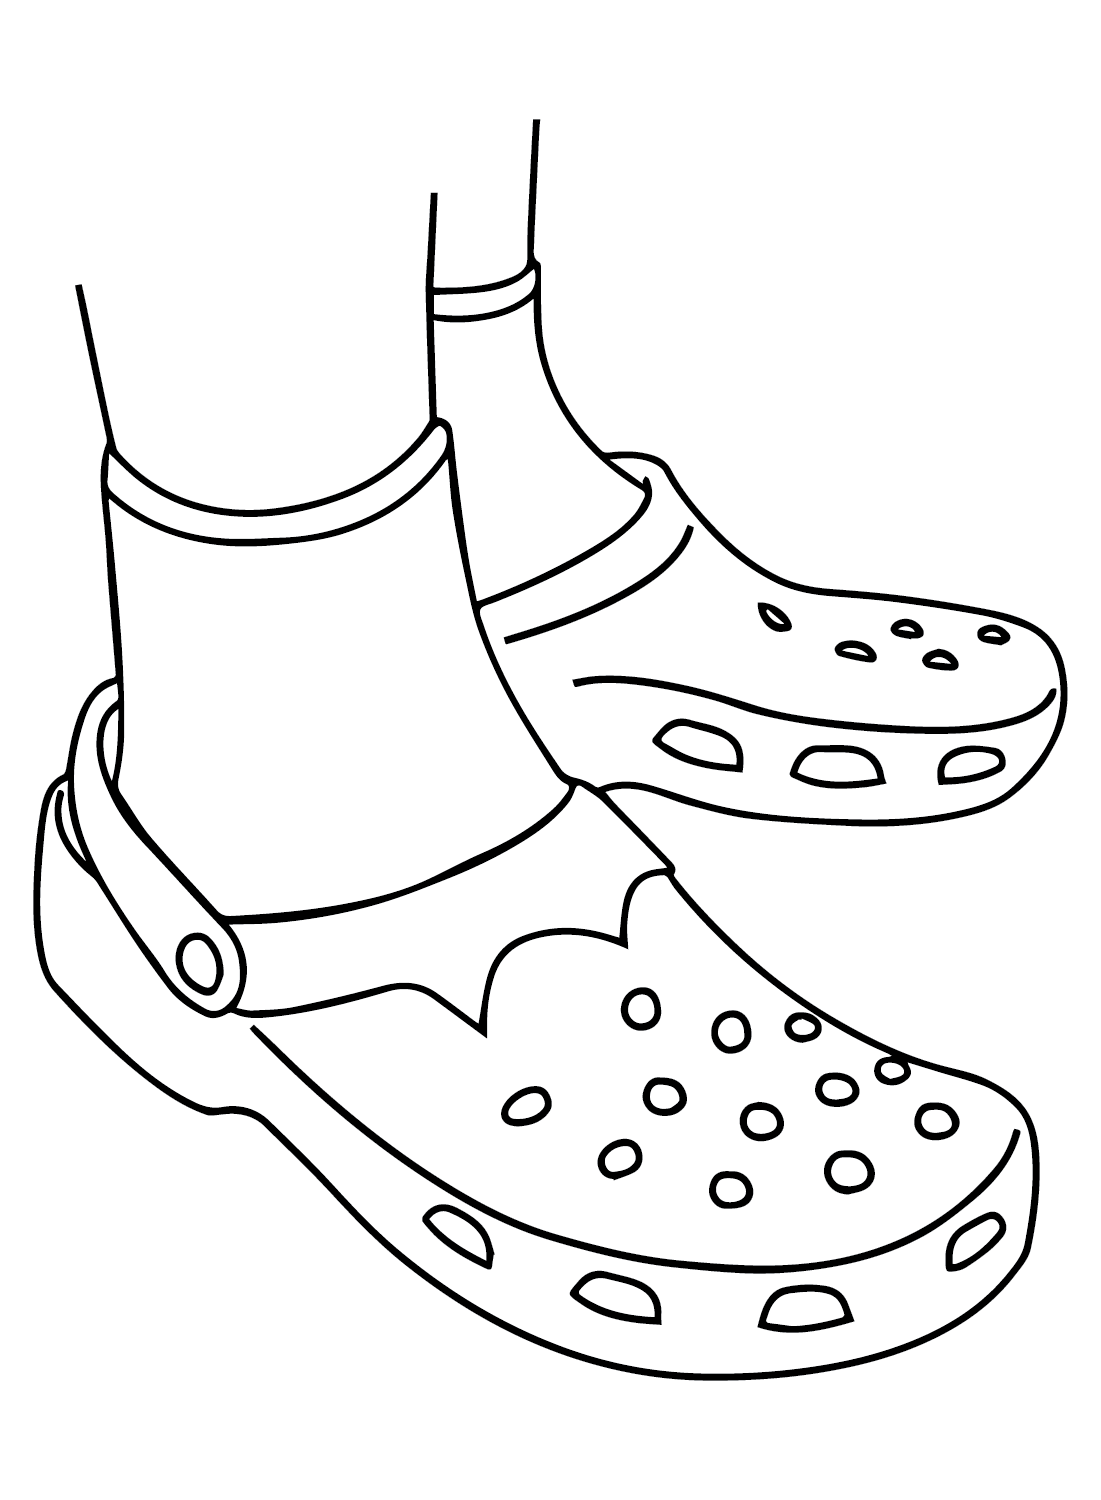 Crocs Coloring Pages - Coloring Home